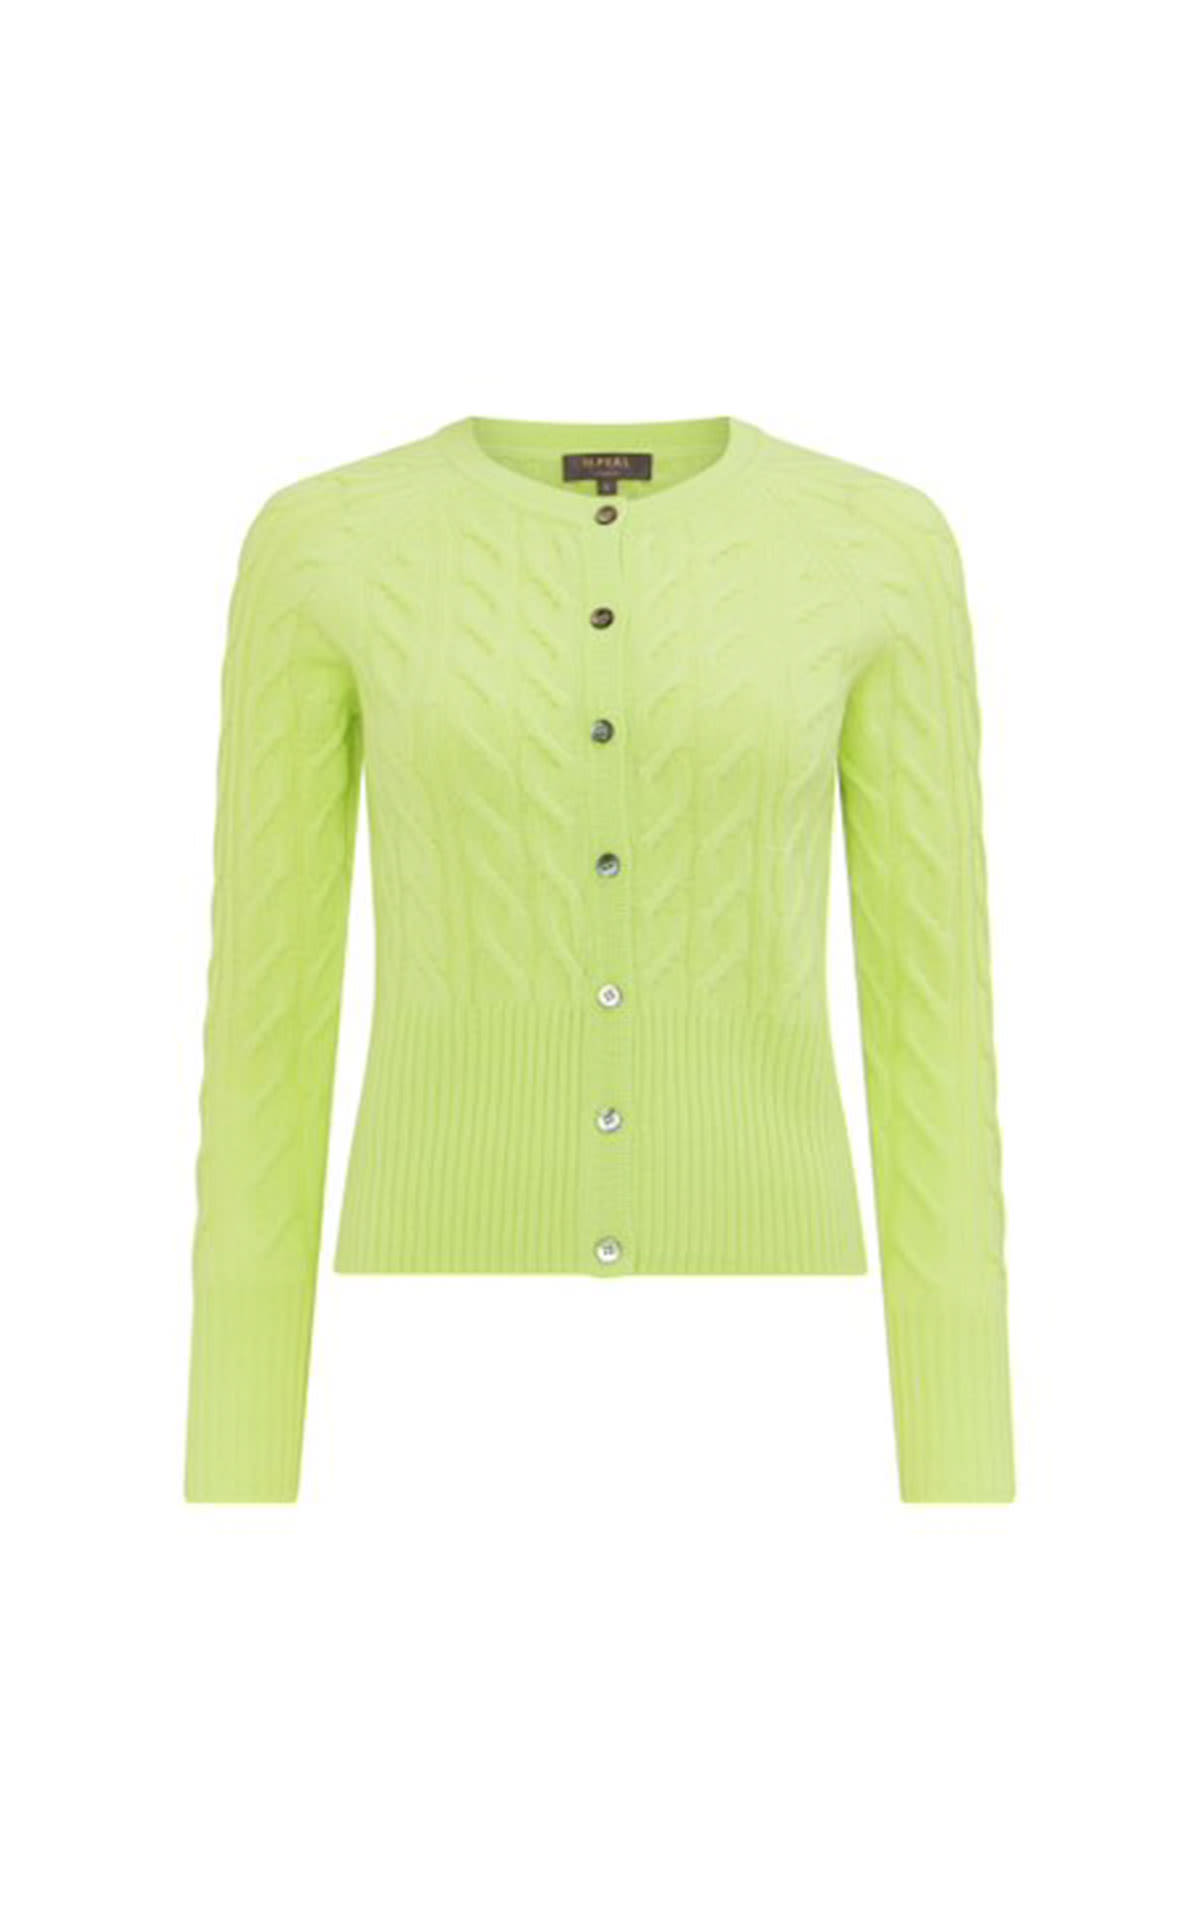 N.Peal Cable cardigan key lime from Bicester Village